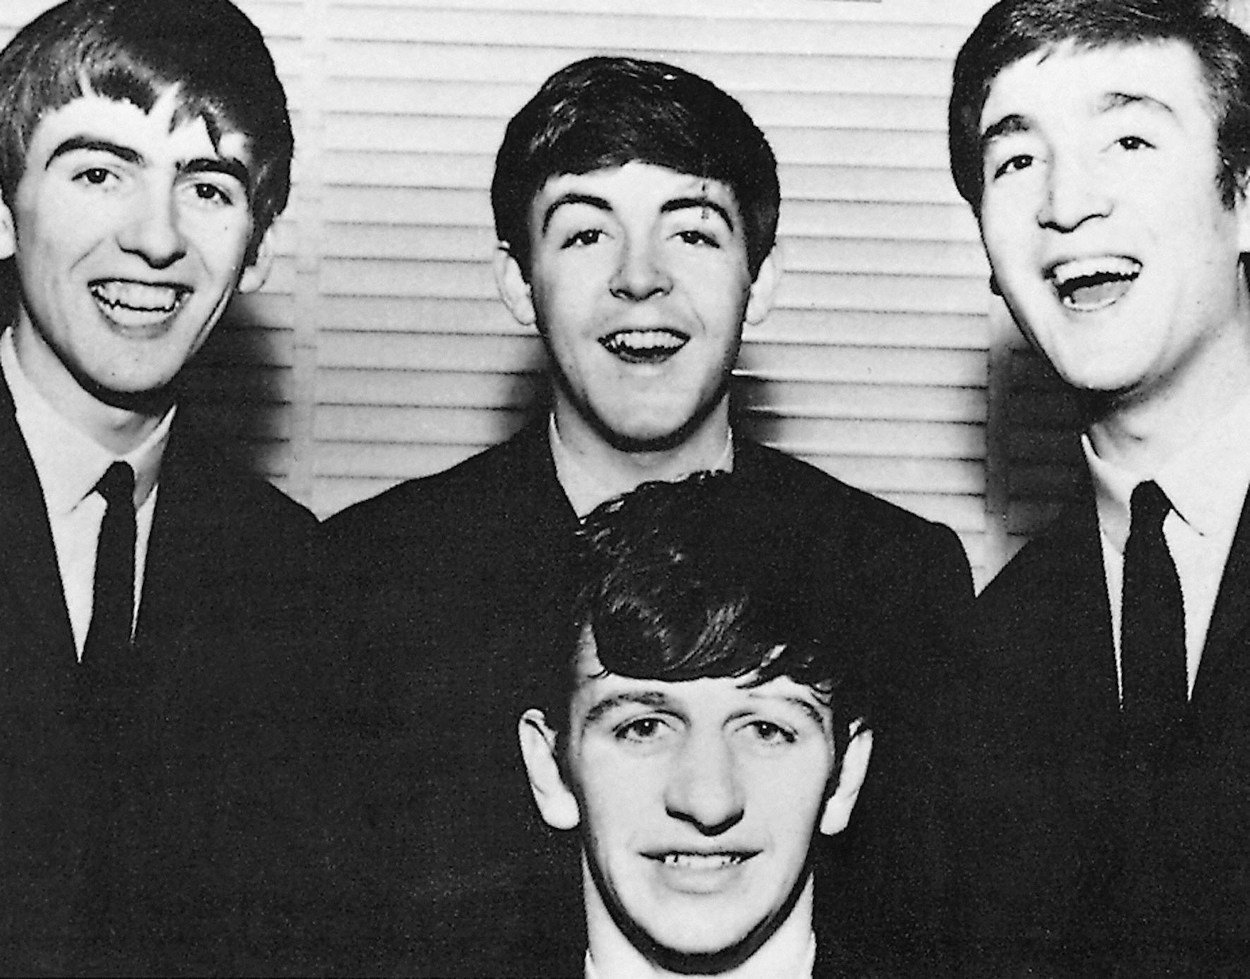 Ringo Starr (front) and George Harrison (back, from left), Paul McCartney and John Lennon of the Beatles in 1962, just two years after the tragic death of Eddie Cochran, may have been what brought Ringo to the Beatles.